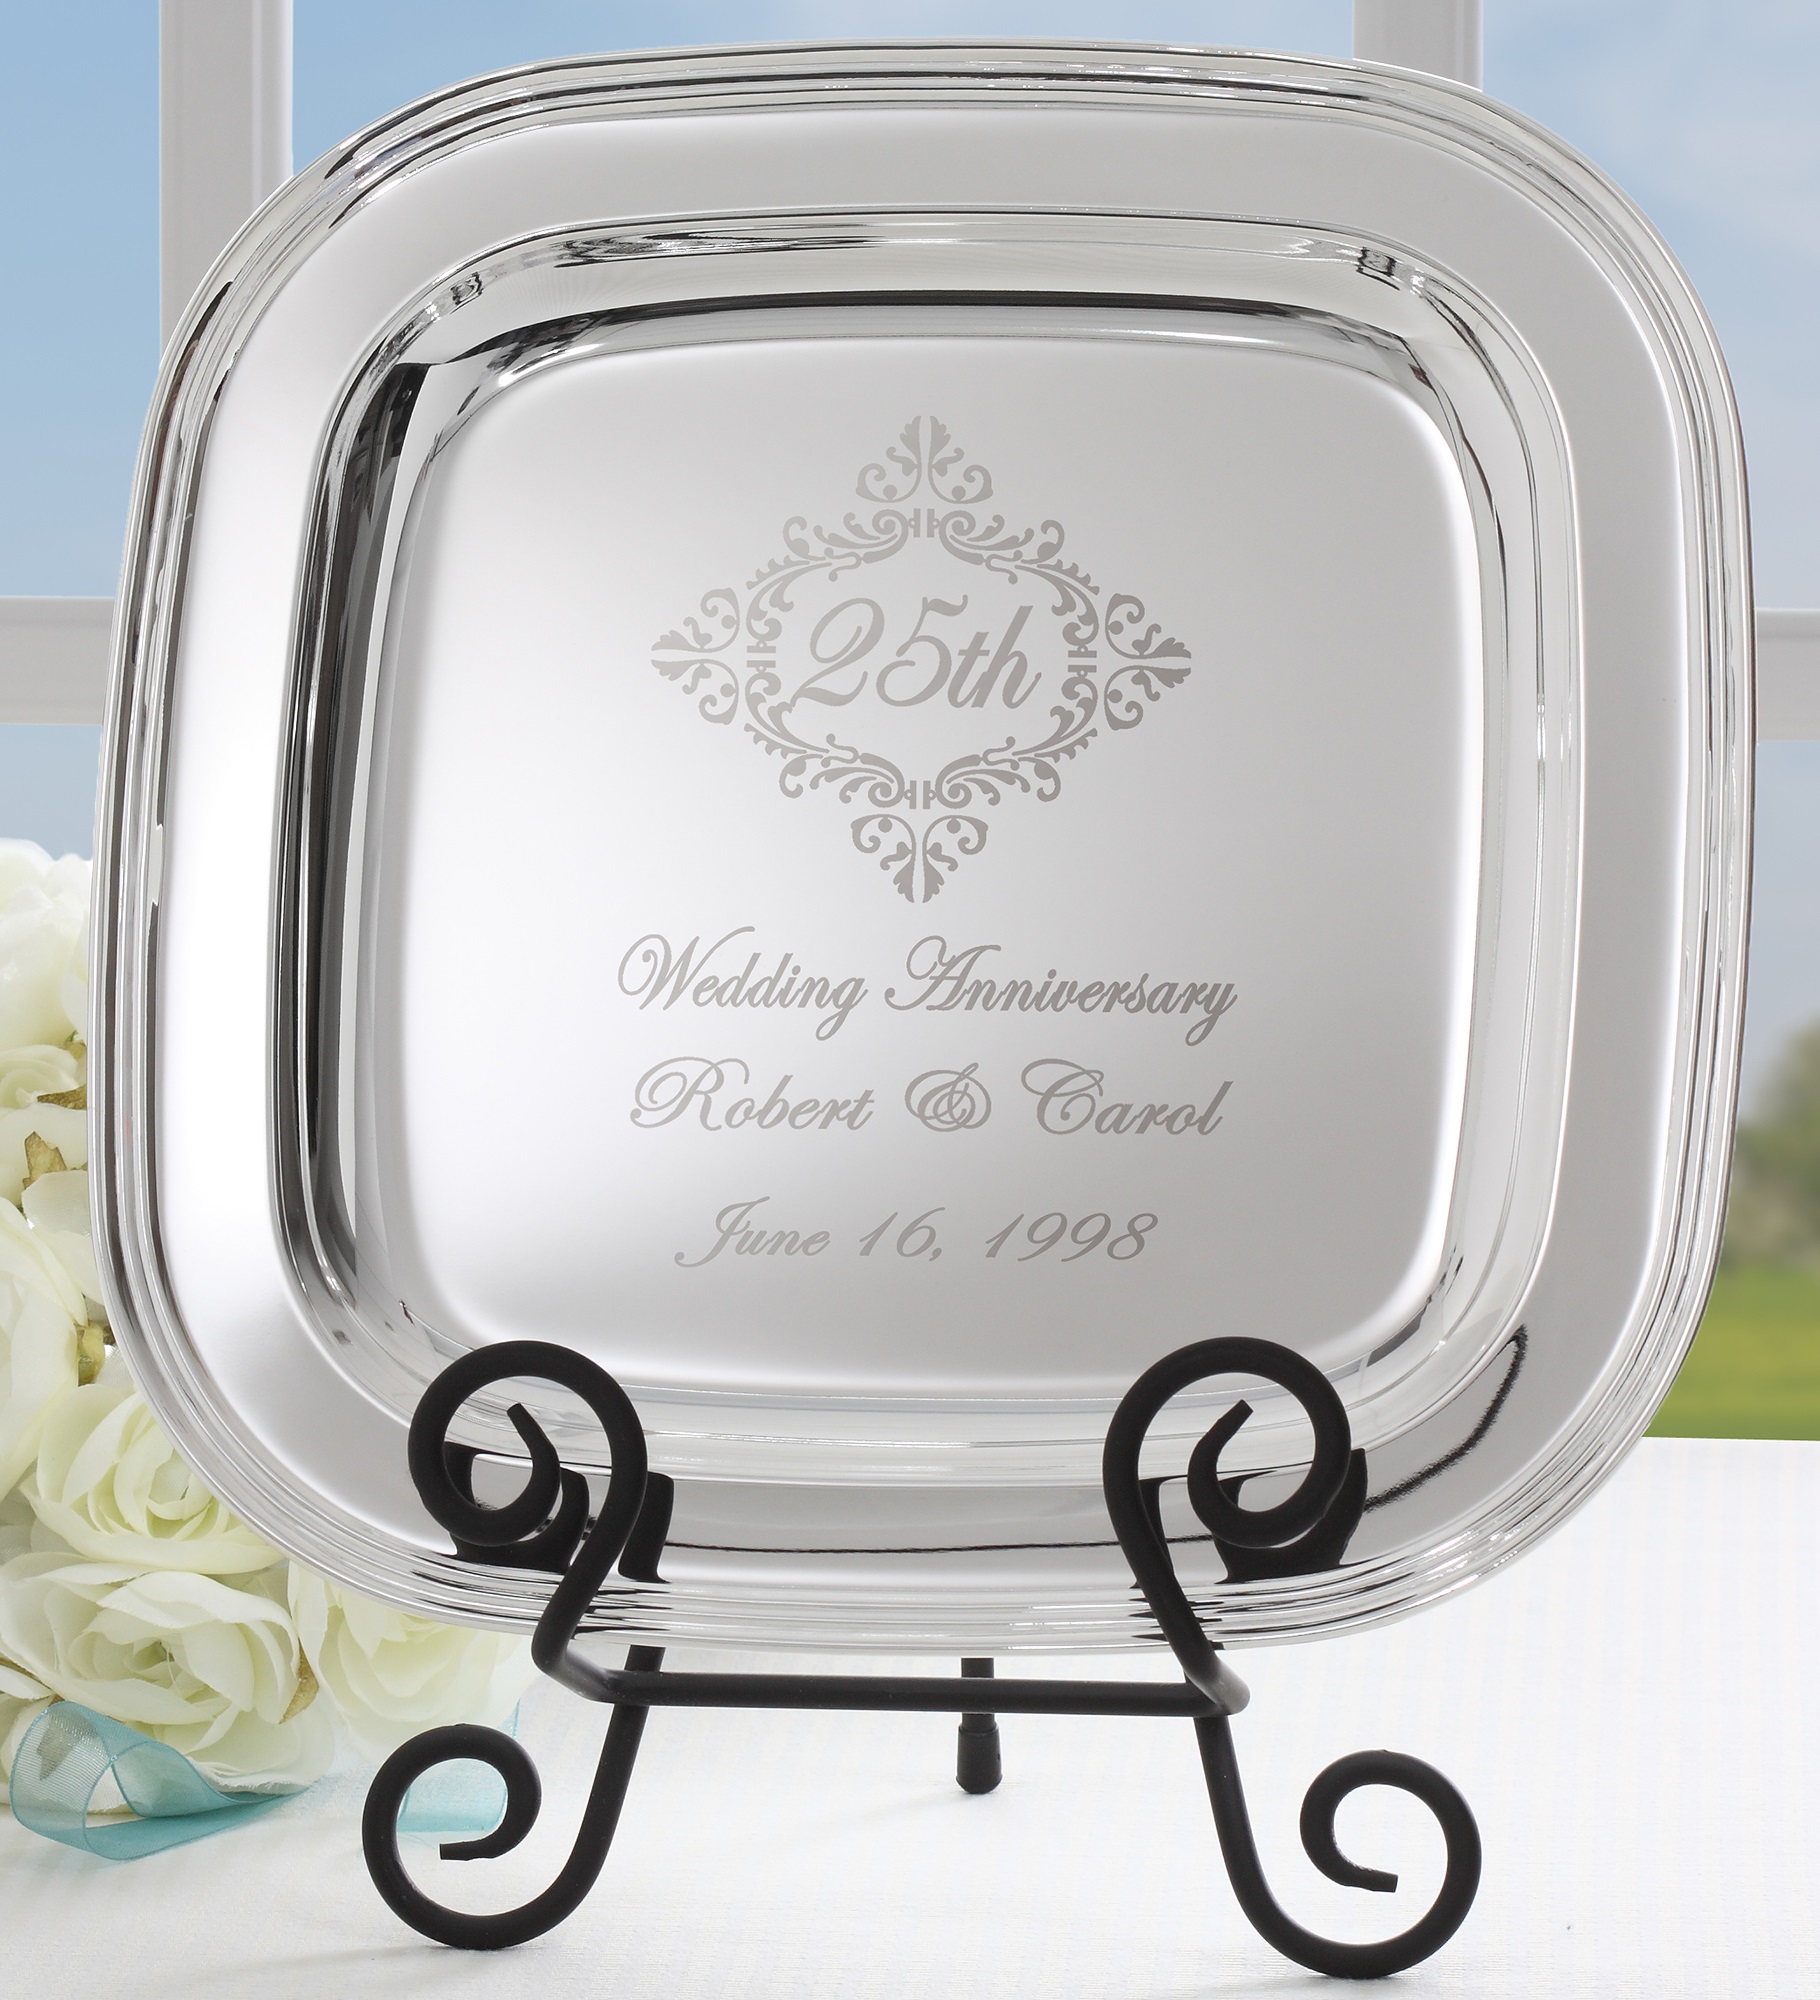 25th Anniversary Gifts - Silver Anniversary Gifts